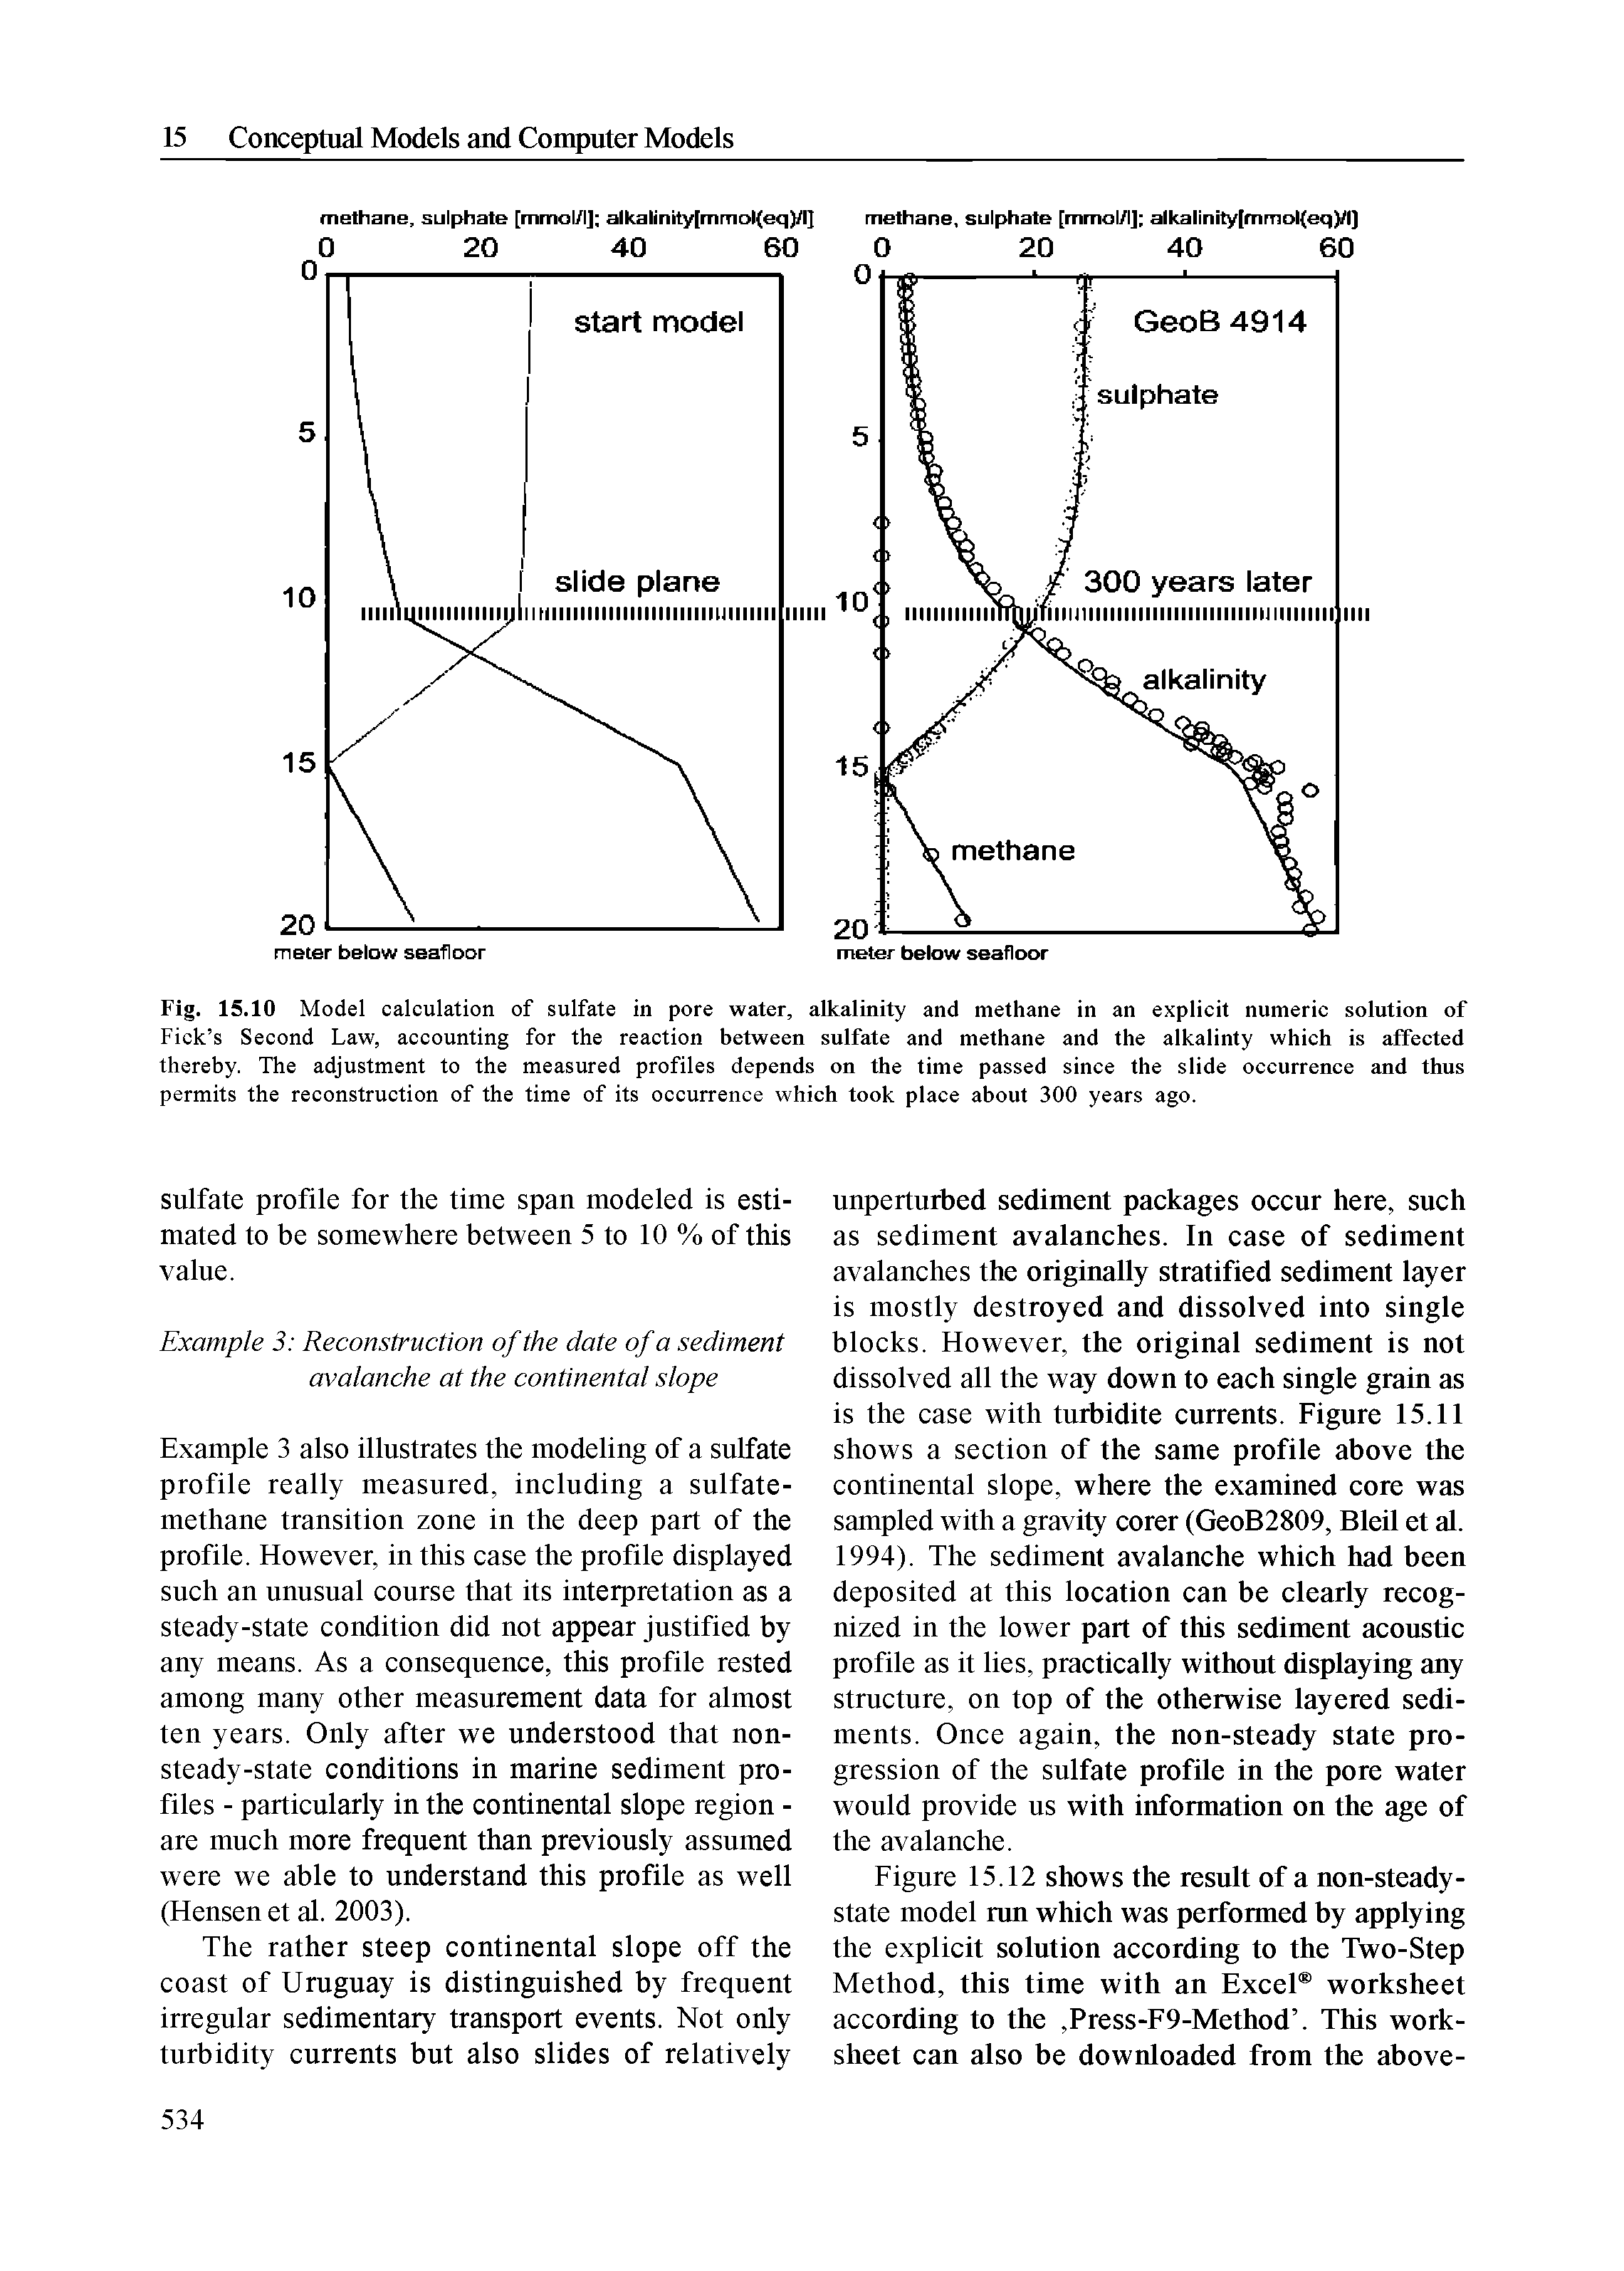 Fig. 15.10 Model calculation of sulfate in pore water, alkalinity and methane in an explicit numeric solution of Pick s Second Law, accounting for the reaction between sulfate and methane and the alkalinty which is affected thereby. The adjustment to the measured profiles depends on the time passed since the slide occurrence and thus permits the reconstruction of the time of its occurrence which took place about 300 years ago.